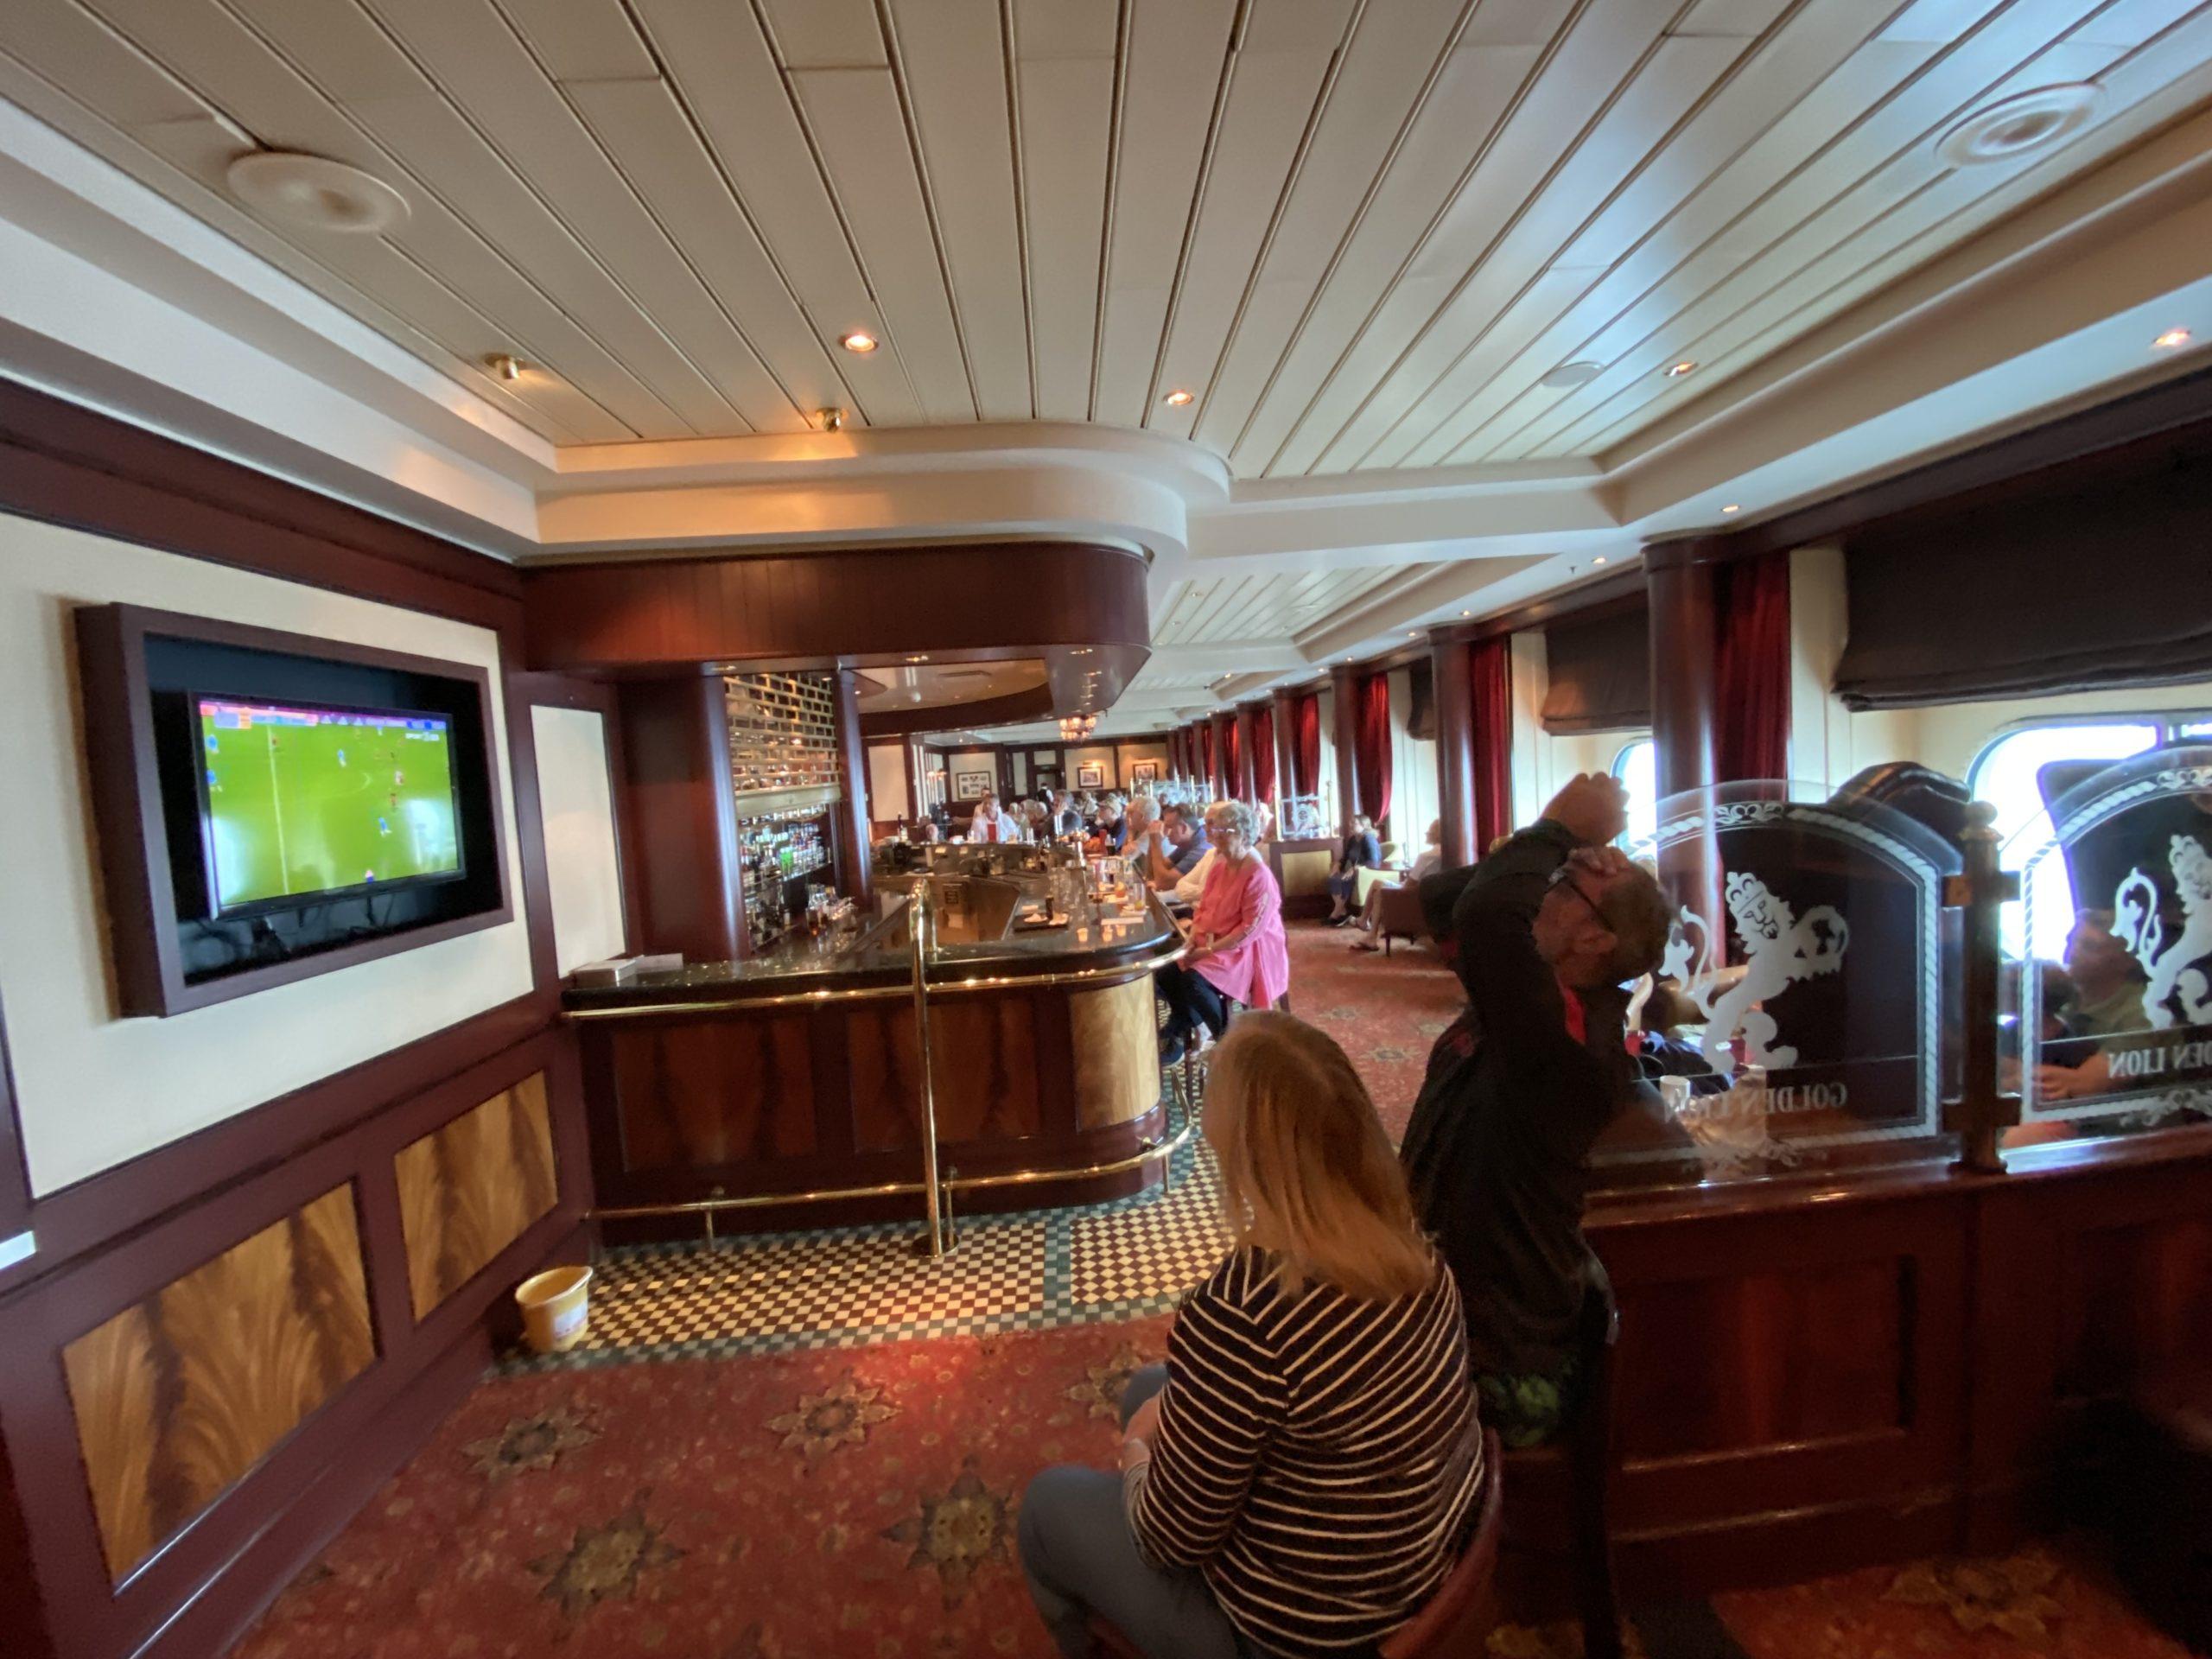 Viewers react to England's World Cup loss in the shipboard pub.